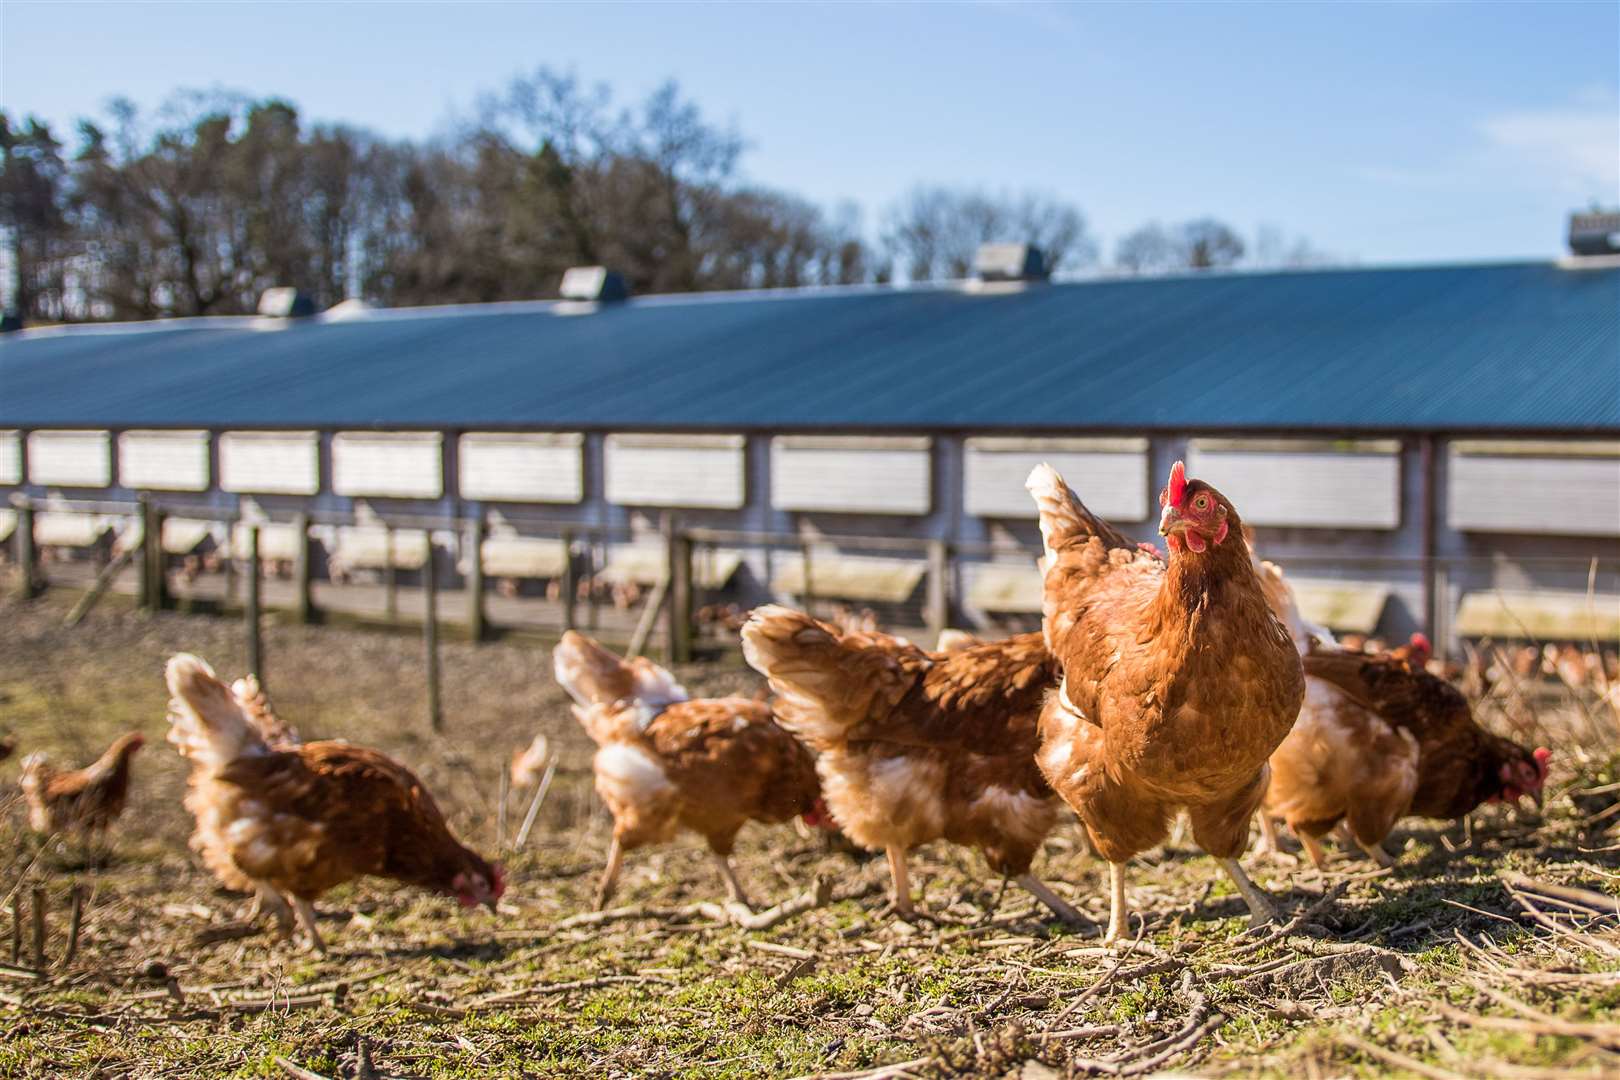 Free range chickens will be allowed to be housed outside from the end of the month.